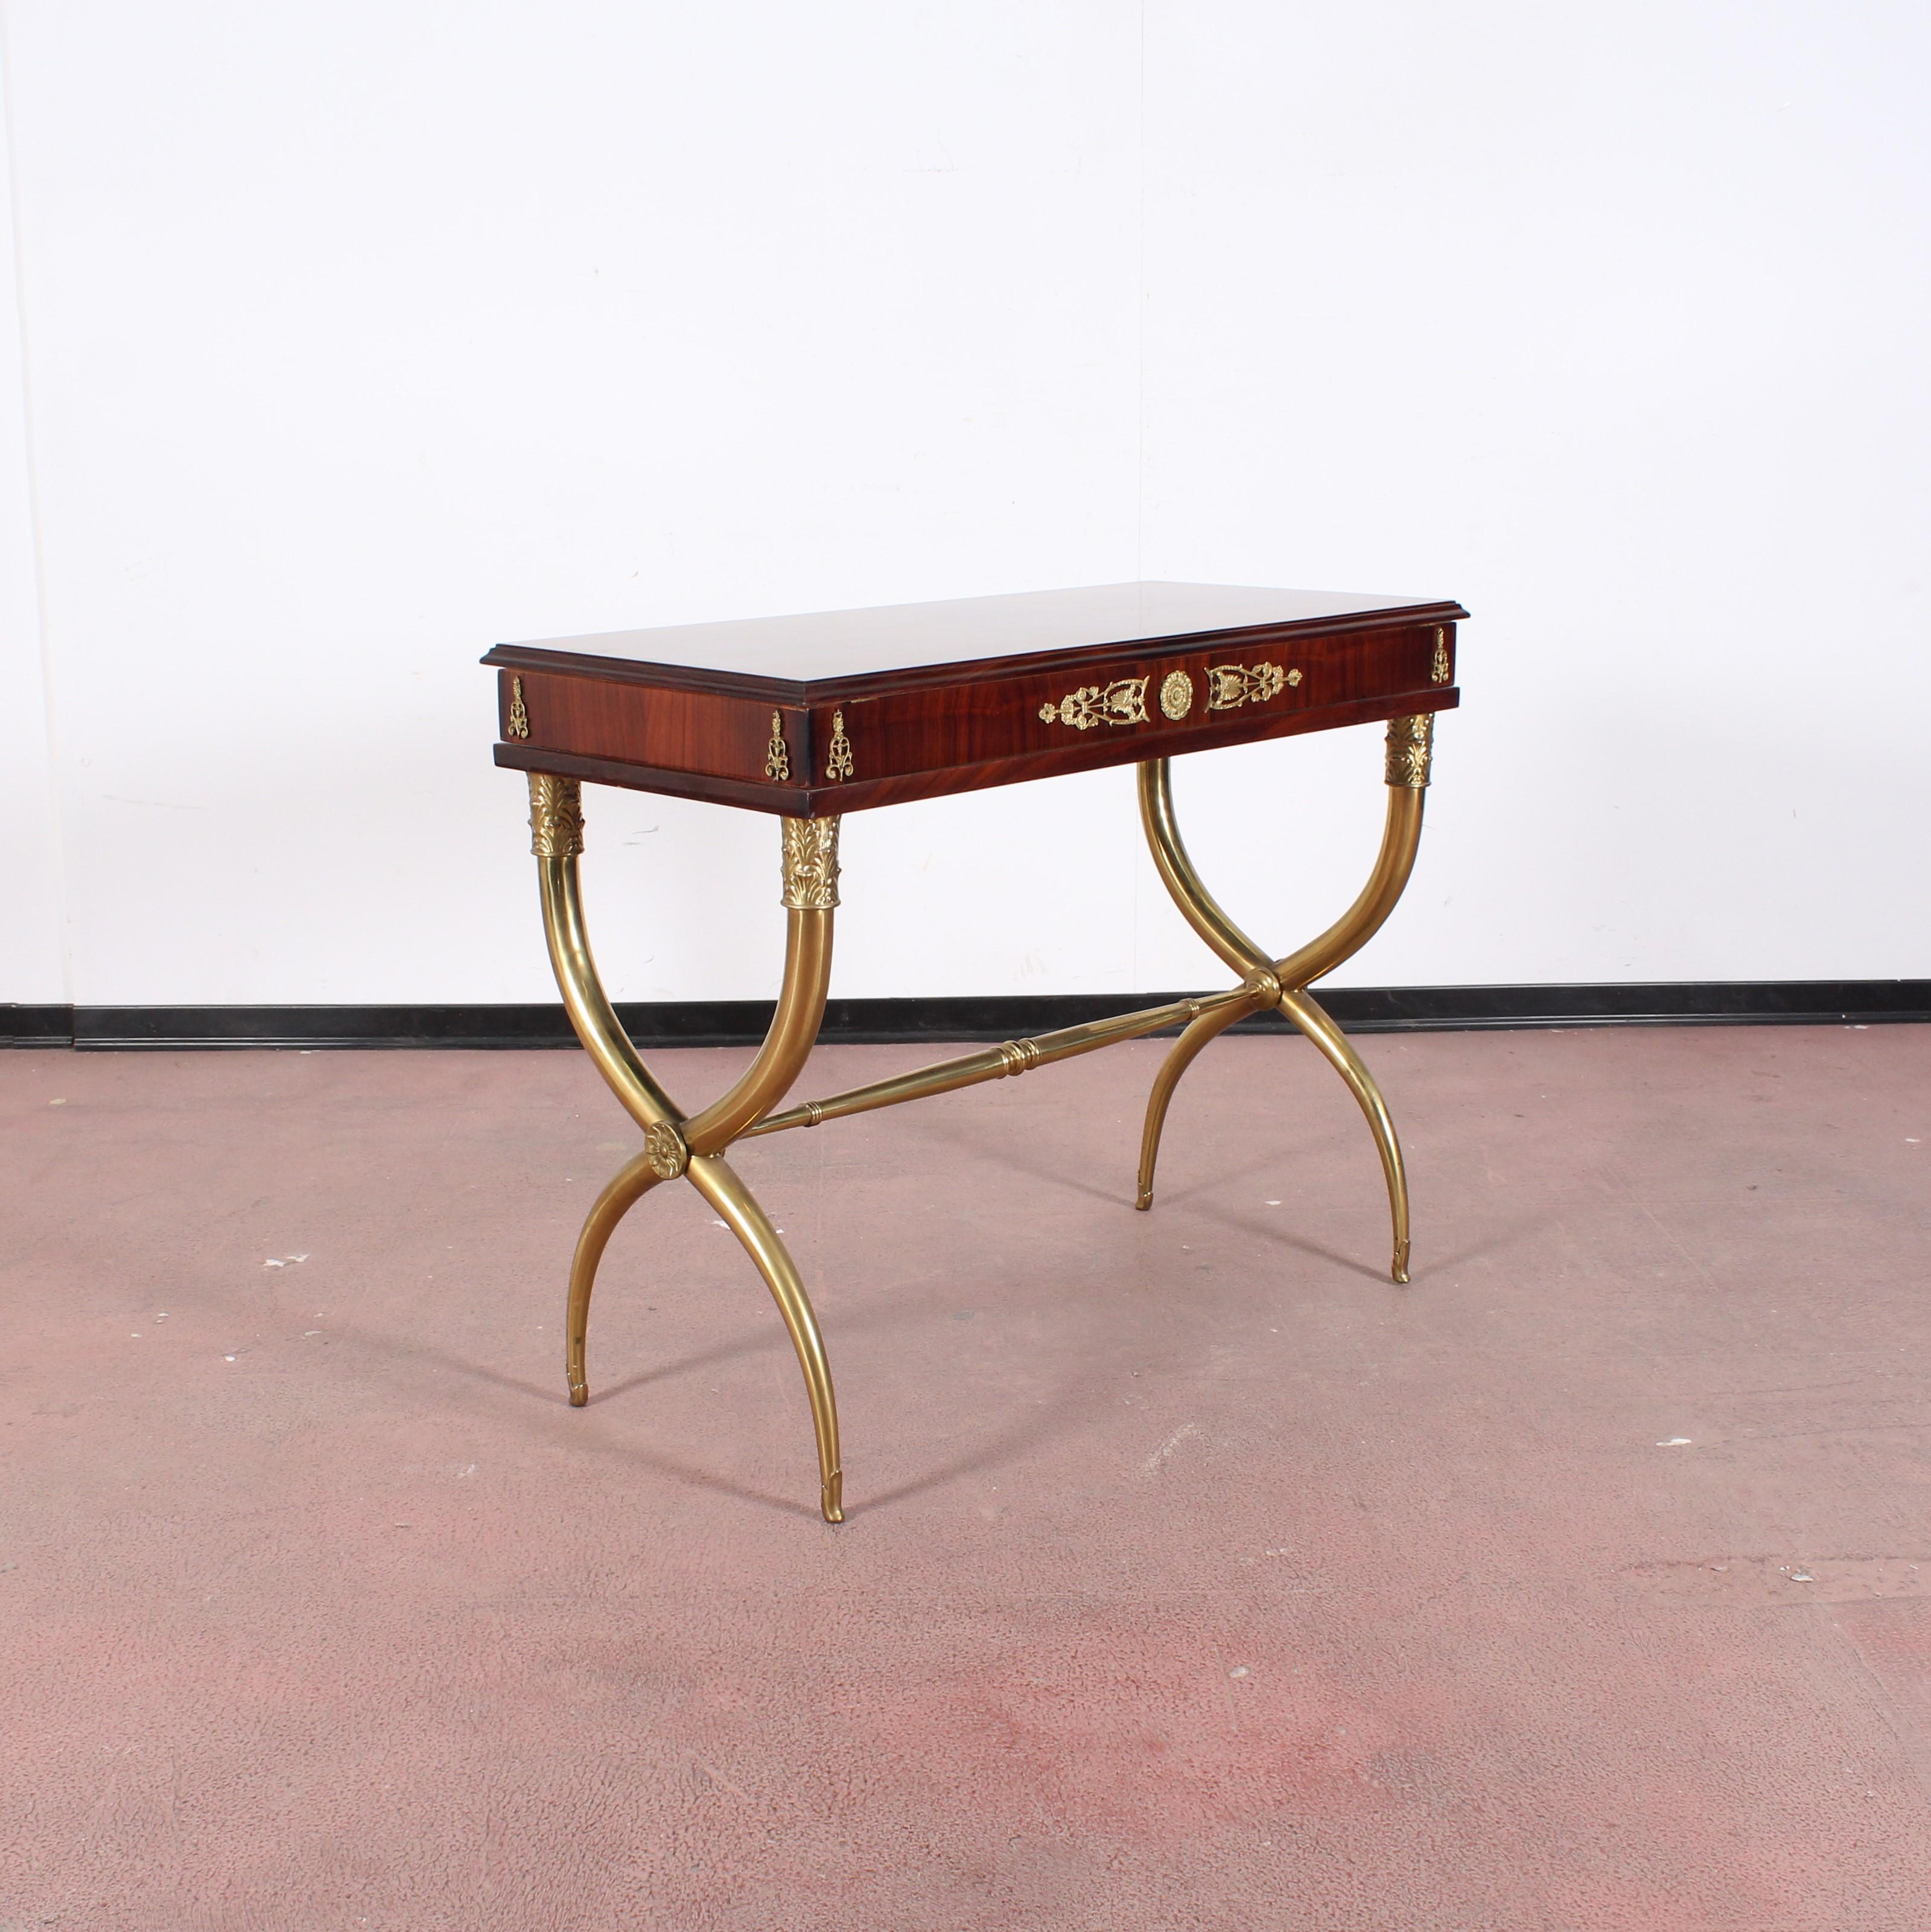 Midcentury Gio Ponti Wood and Brass Console Table with Top Container 1950s Italy 3